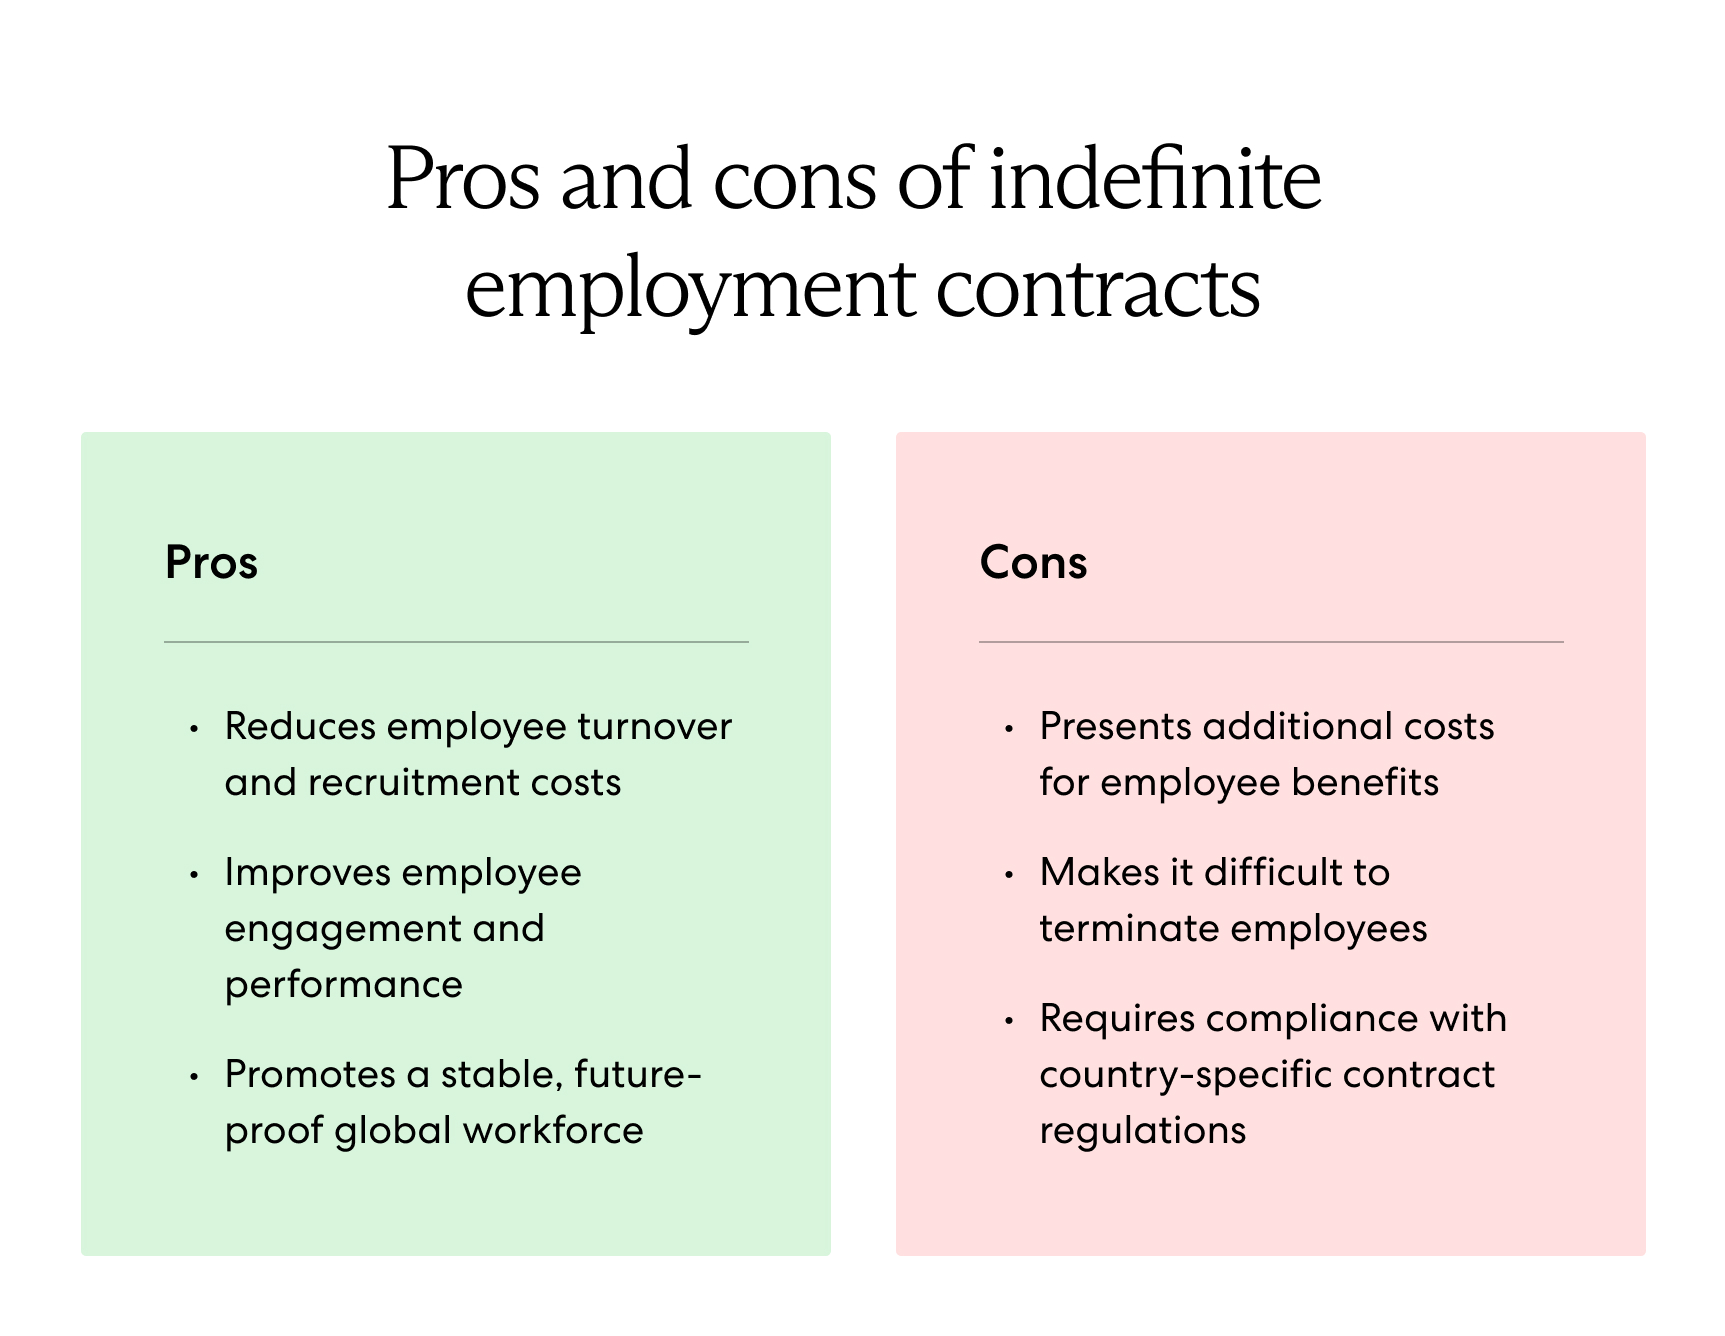 Chart listing the pros and cons global employers face when using indefinite employment contracts